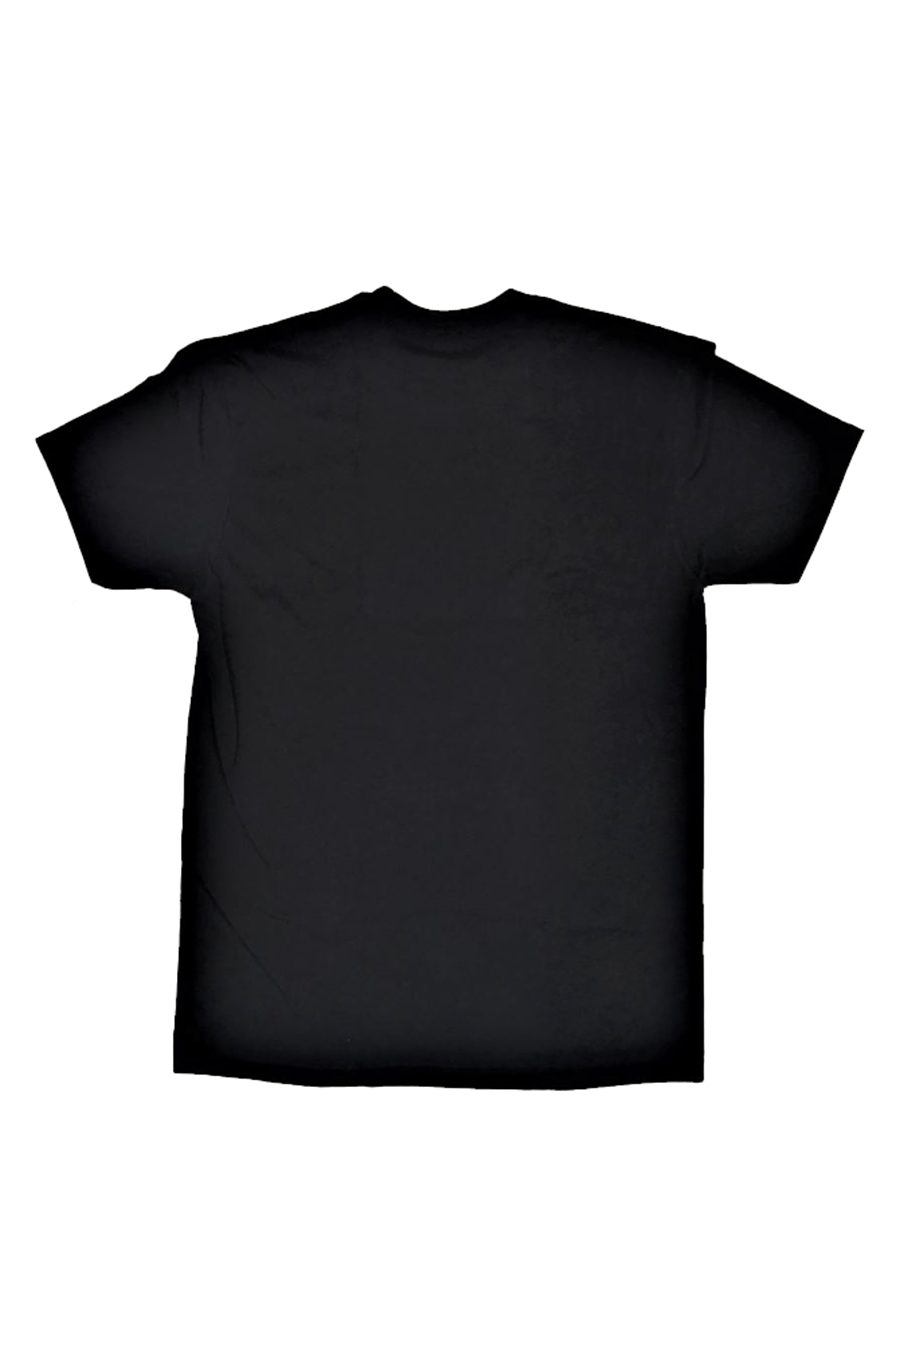 Business Tee | Black - Main Image Number 2 of 2